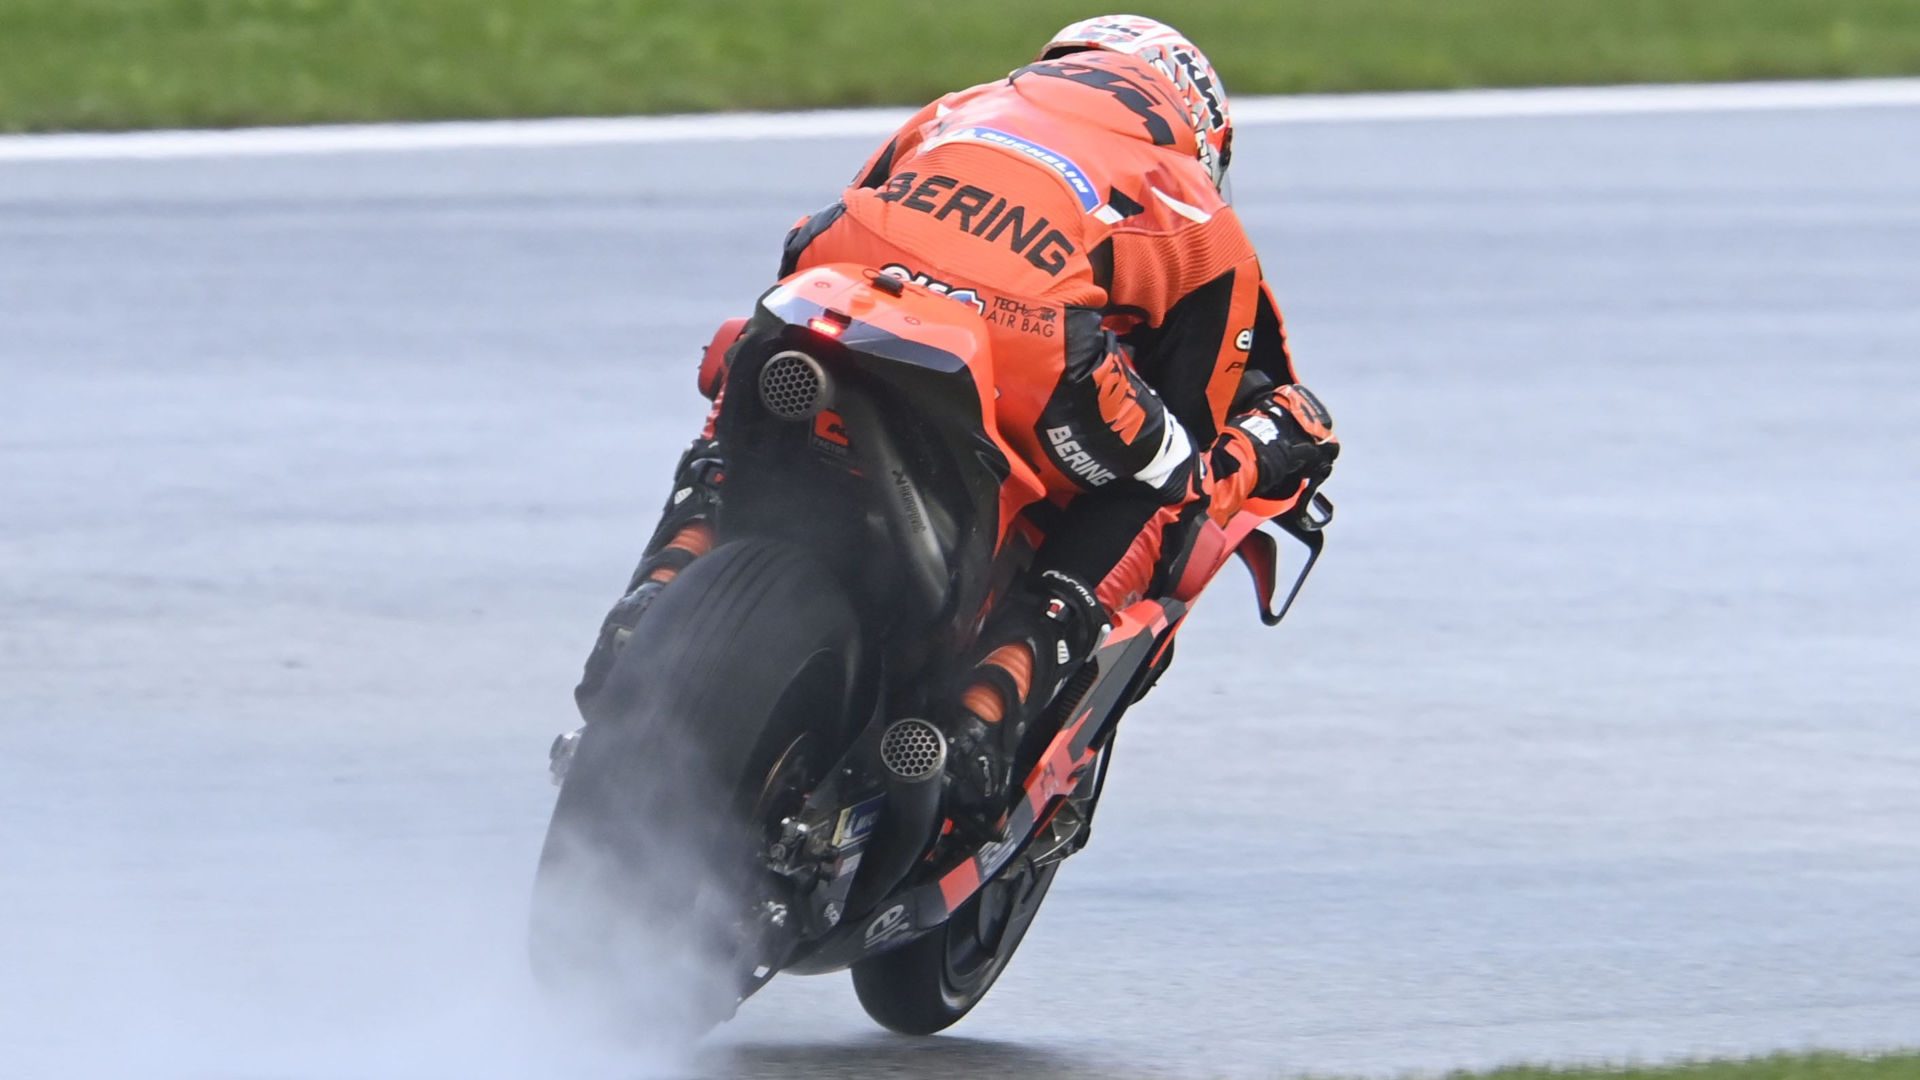 MotoGP: Lecuona Leads Rain Affected FP2 At Red Bull Ring II (Updated) World Magazine. Motorcycle Riding, Racing & Tech News